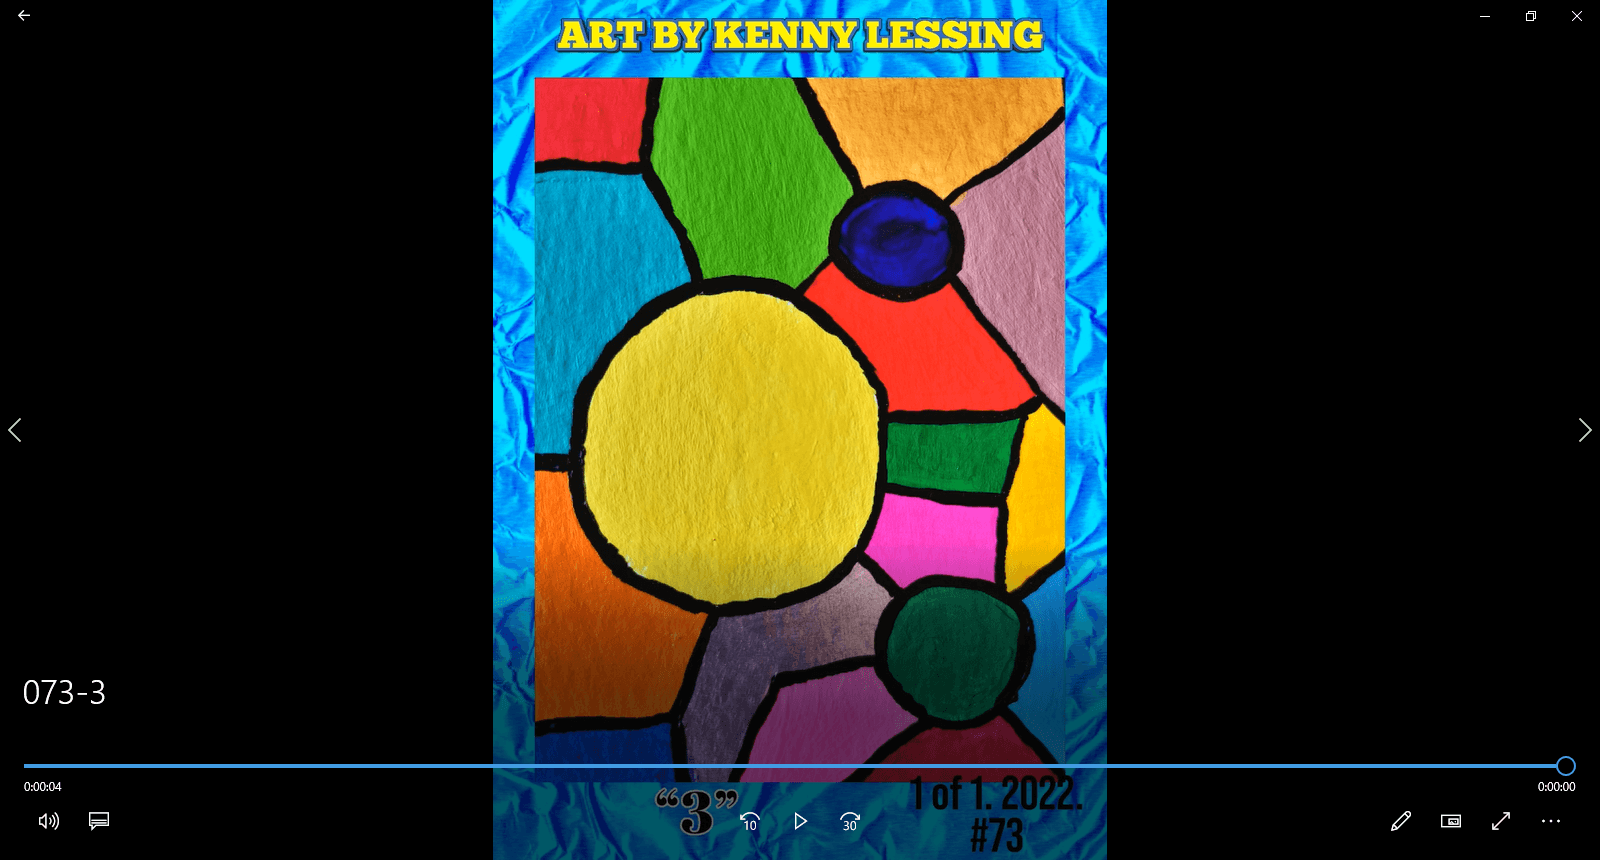 3 2022 Art By Kenny Lessing 1 of 1 card # 073